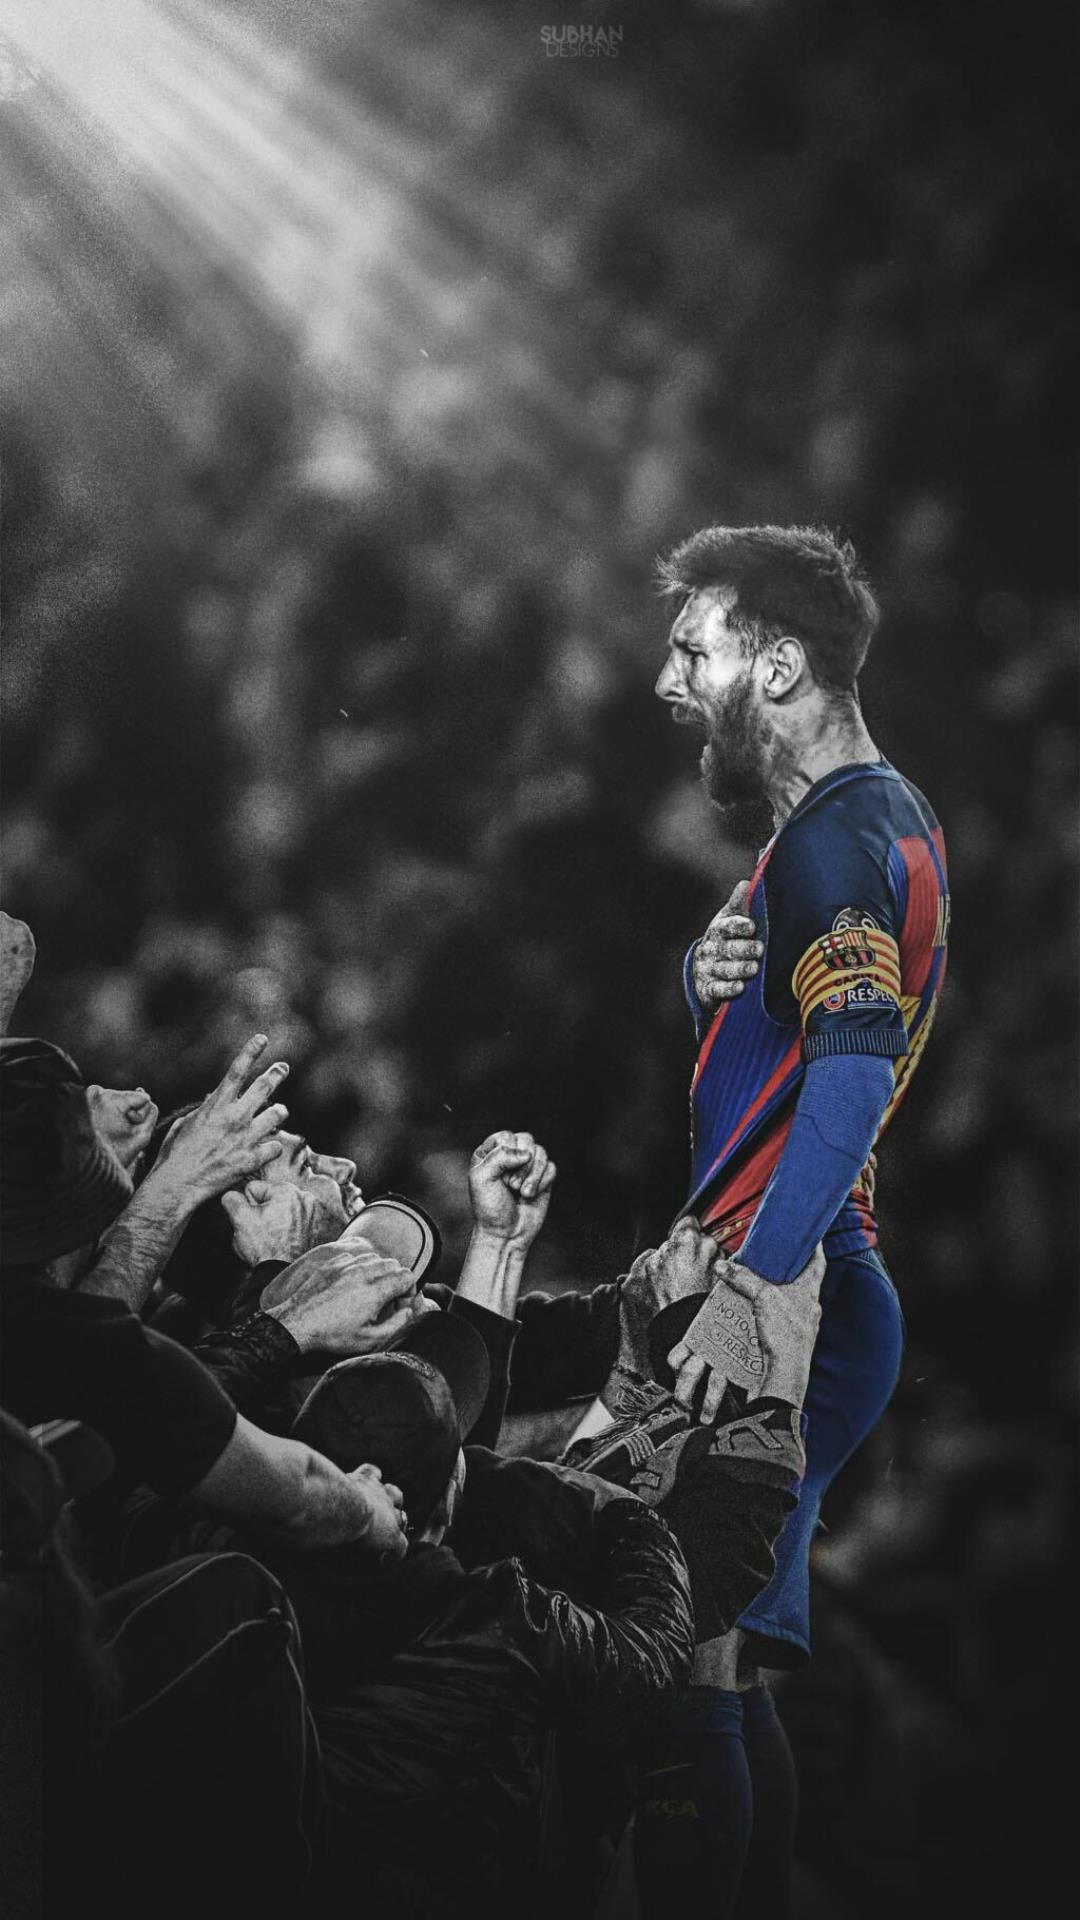 Messi Phone Wallpapers